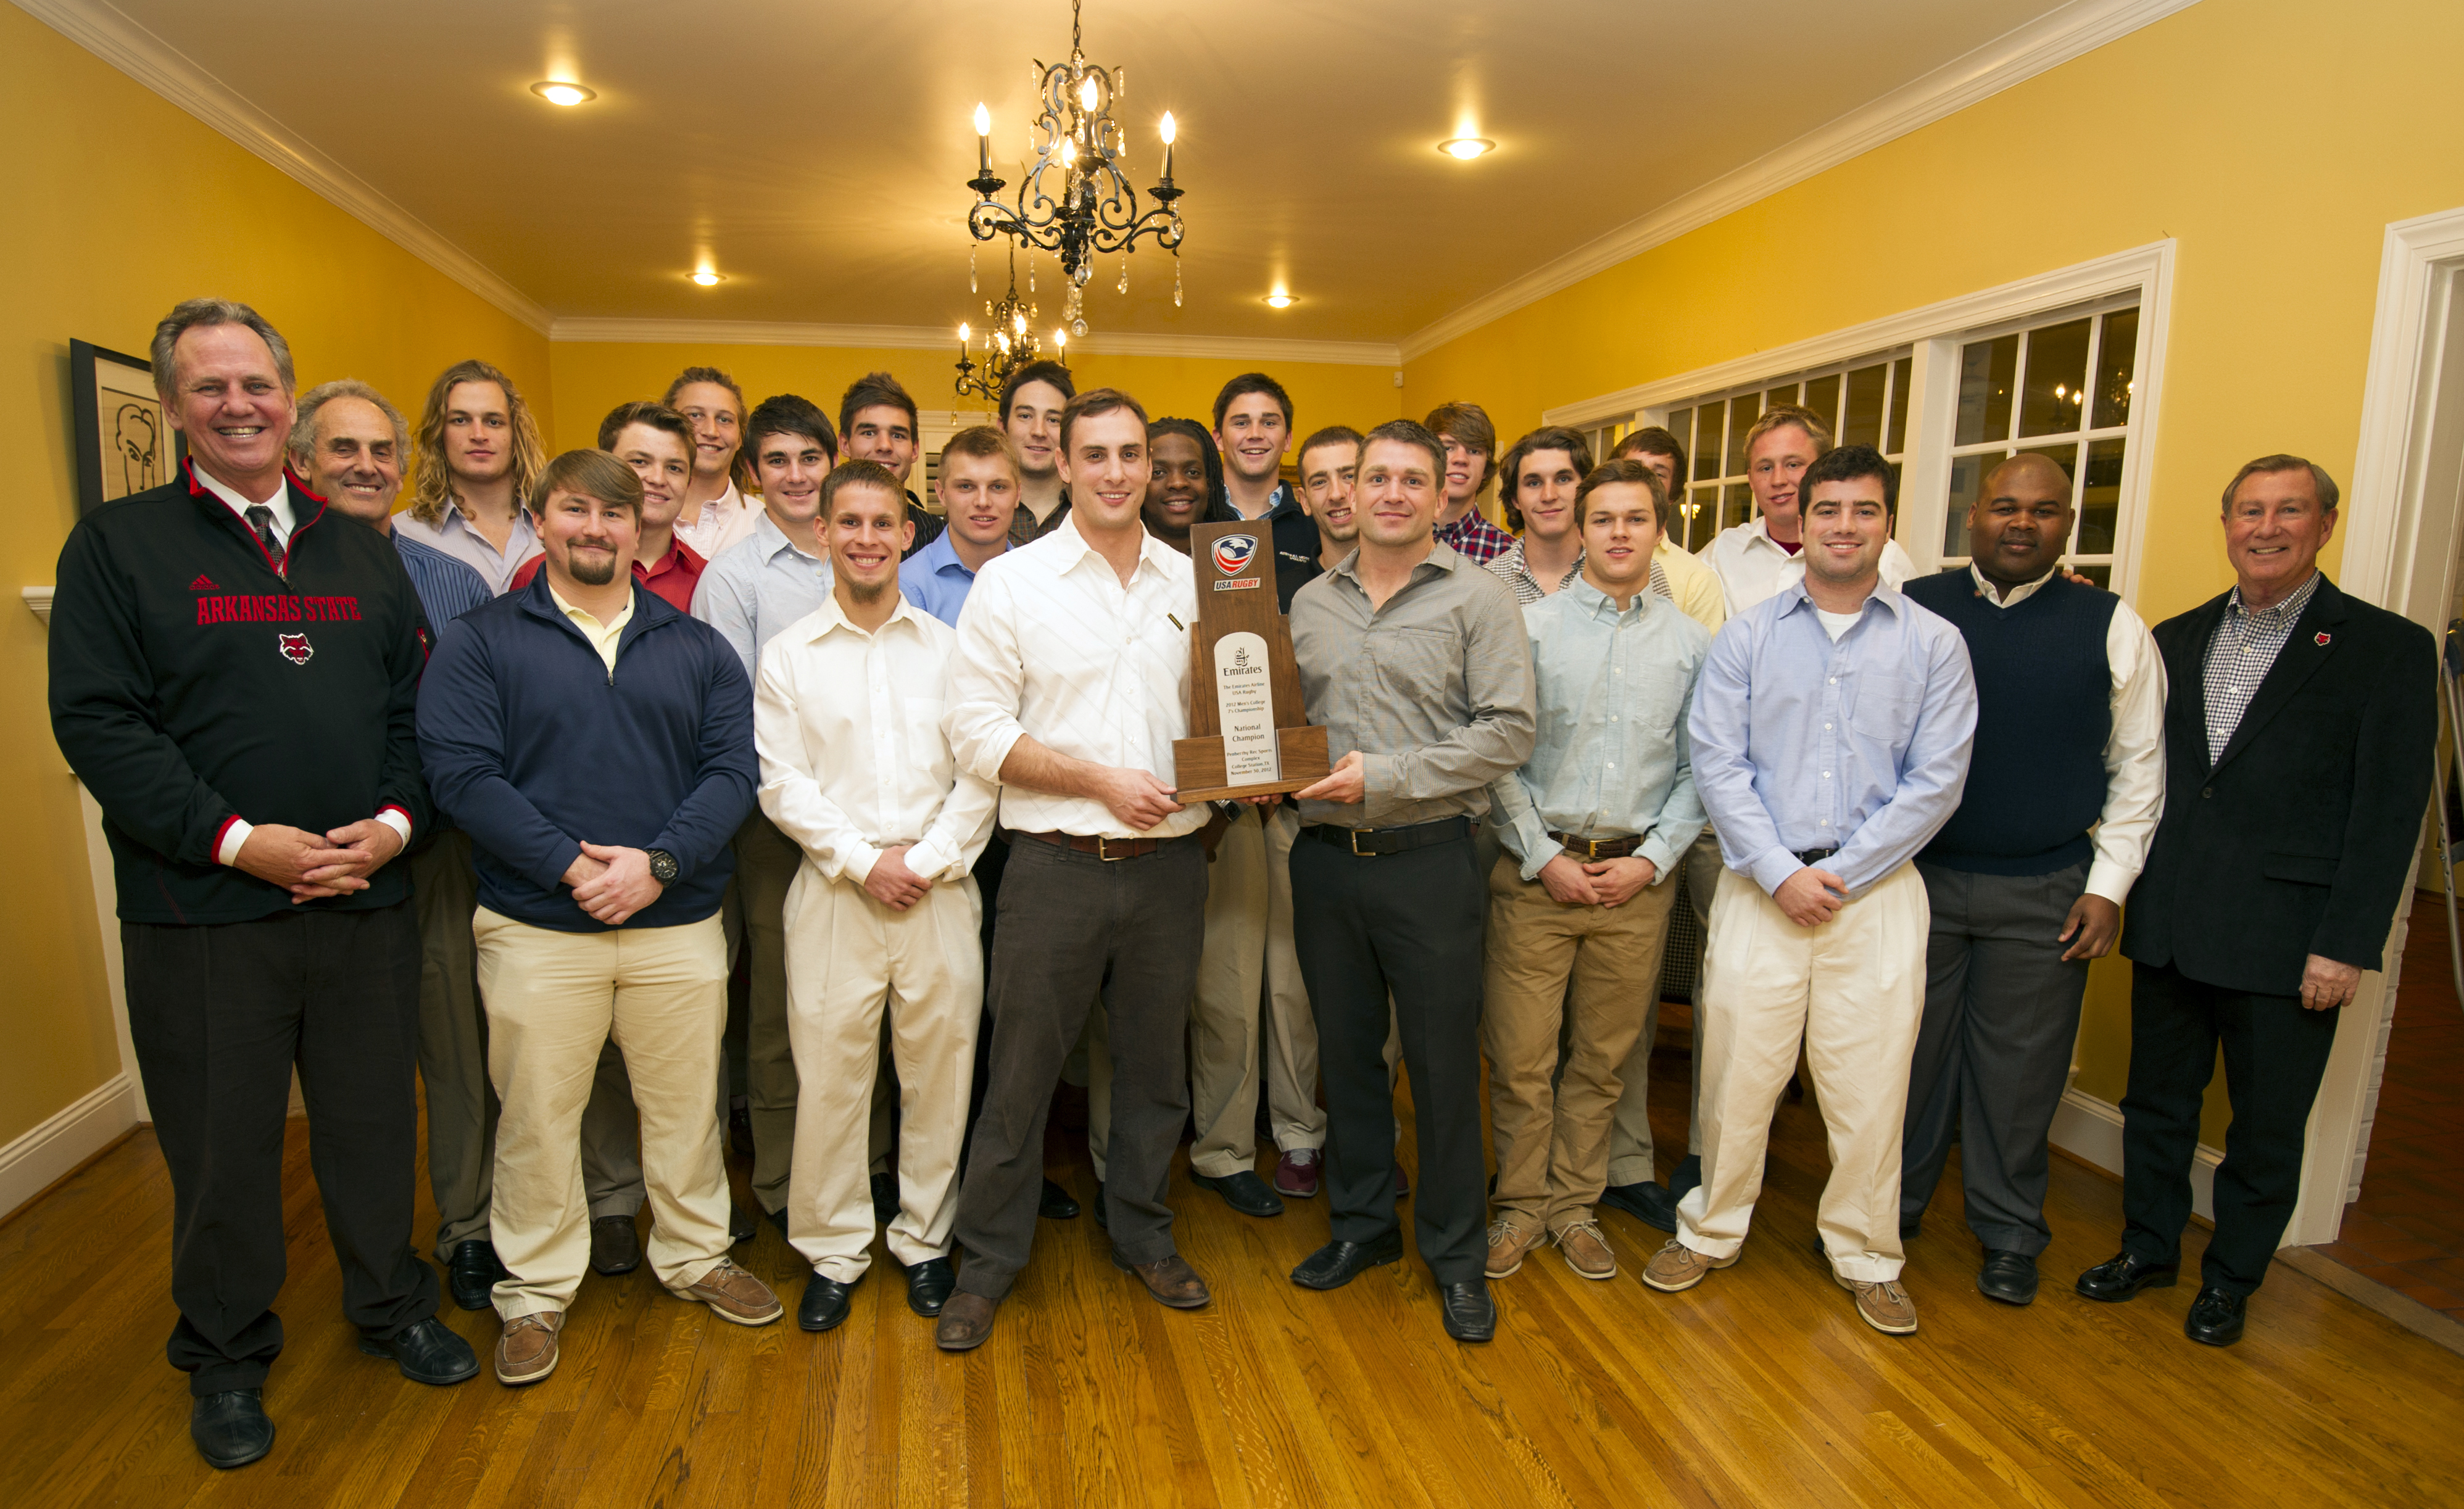 Pictured:  Chancellor Tim Hudson (far left) and Board of Trustees member Mike Gibson (far right) flank the 2012 National Champion College 7s rugby team. Former head coach Matt Huckaby (left in center) and new head coach Alex Houser hold the championship trophy.